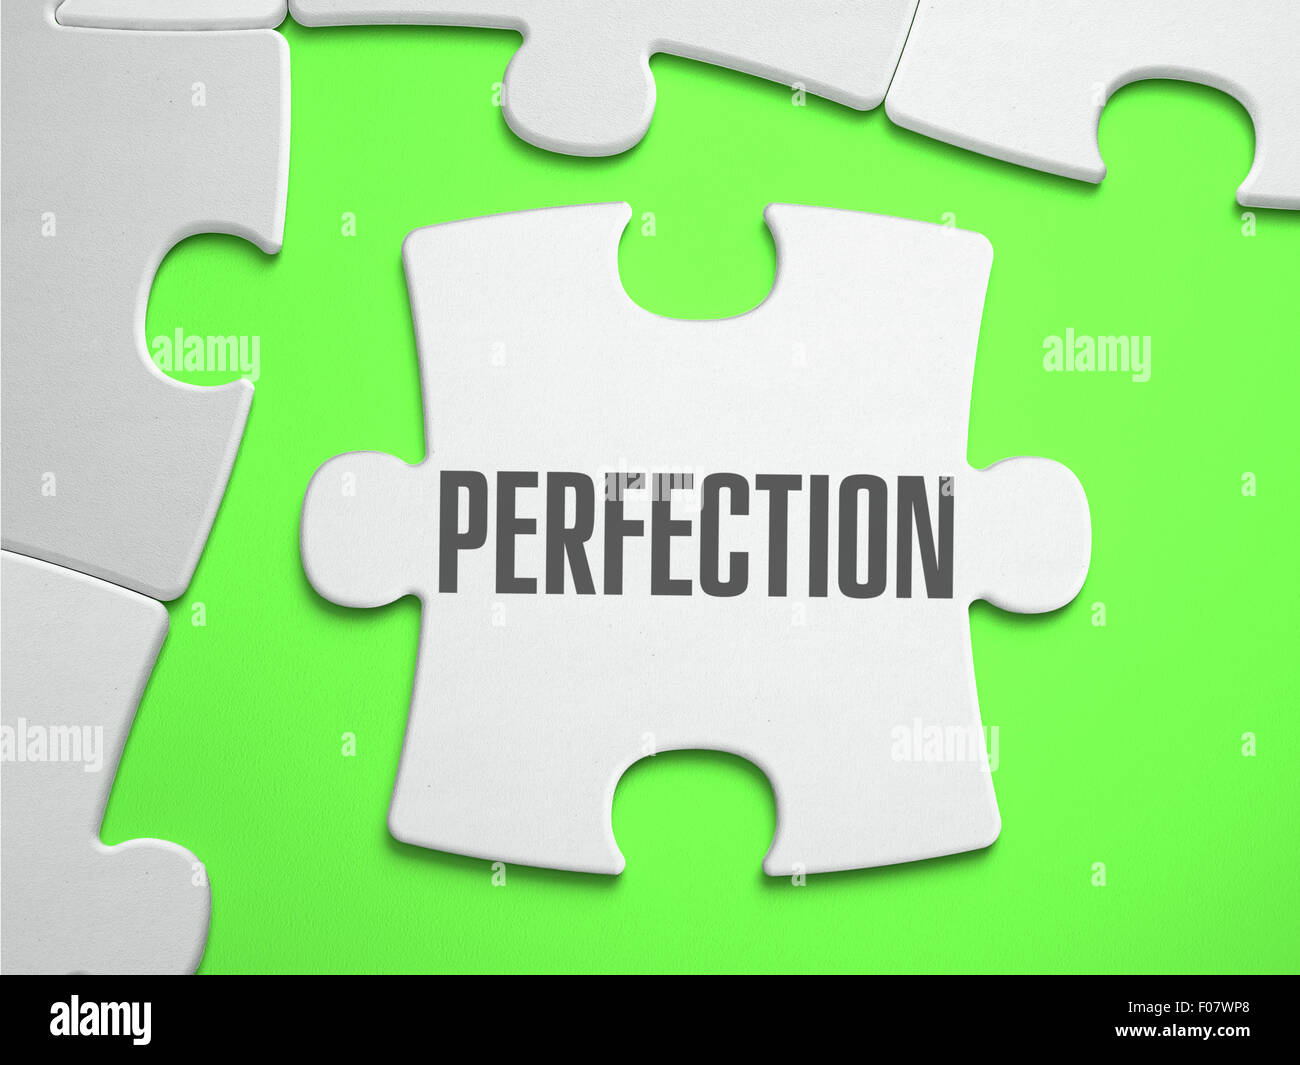 Perfection - Jigsaw Puzzle with Missing Pieces. Stock Photo